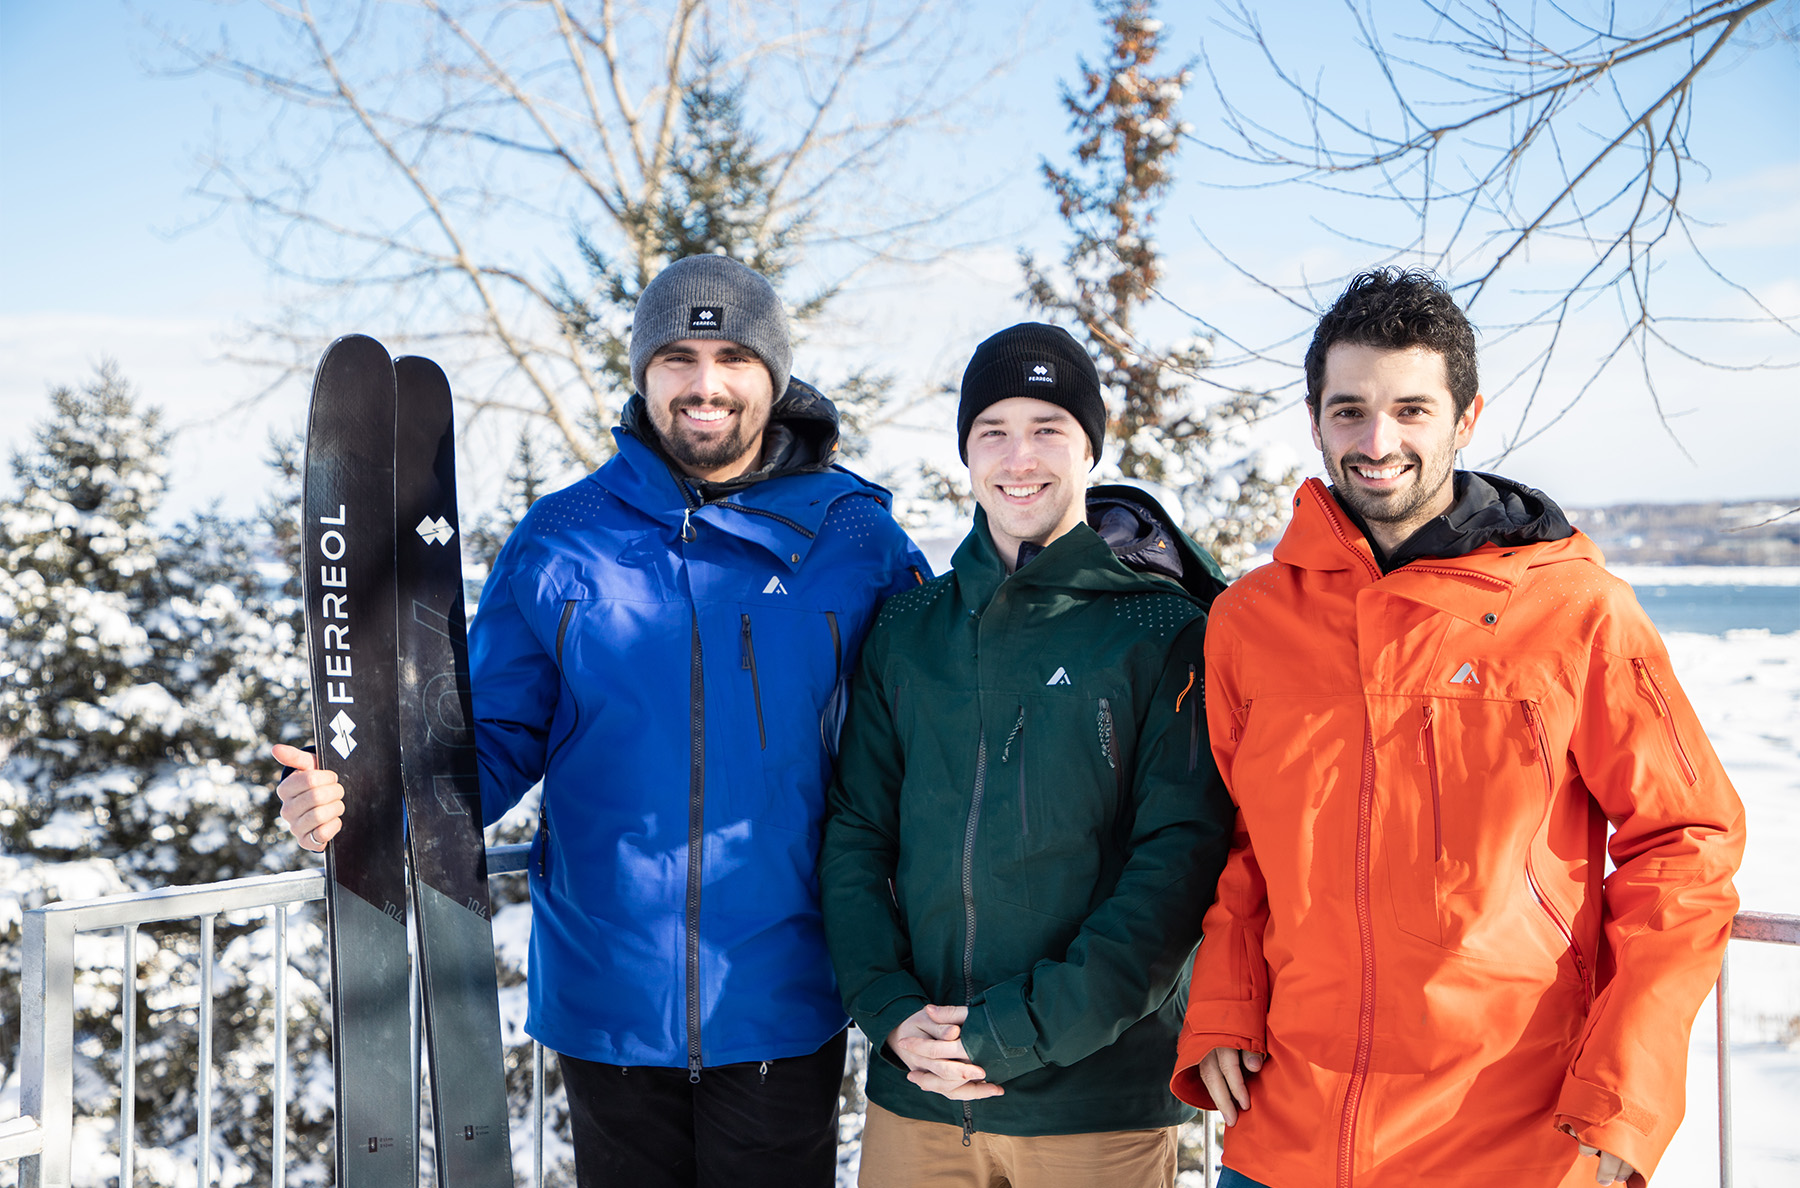 On GEAR:30, we talk with Ferreol co-founder, Jonathan Audet, about how they created their own “Innovation Lab” to test new skis and materials; the development of their own alternative to titanal alloy; fully replacing fiberglass with natural flax fibers; their 23/24 ski lineup, and more.